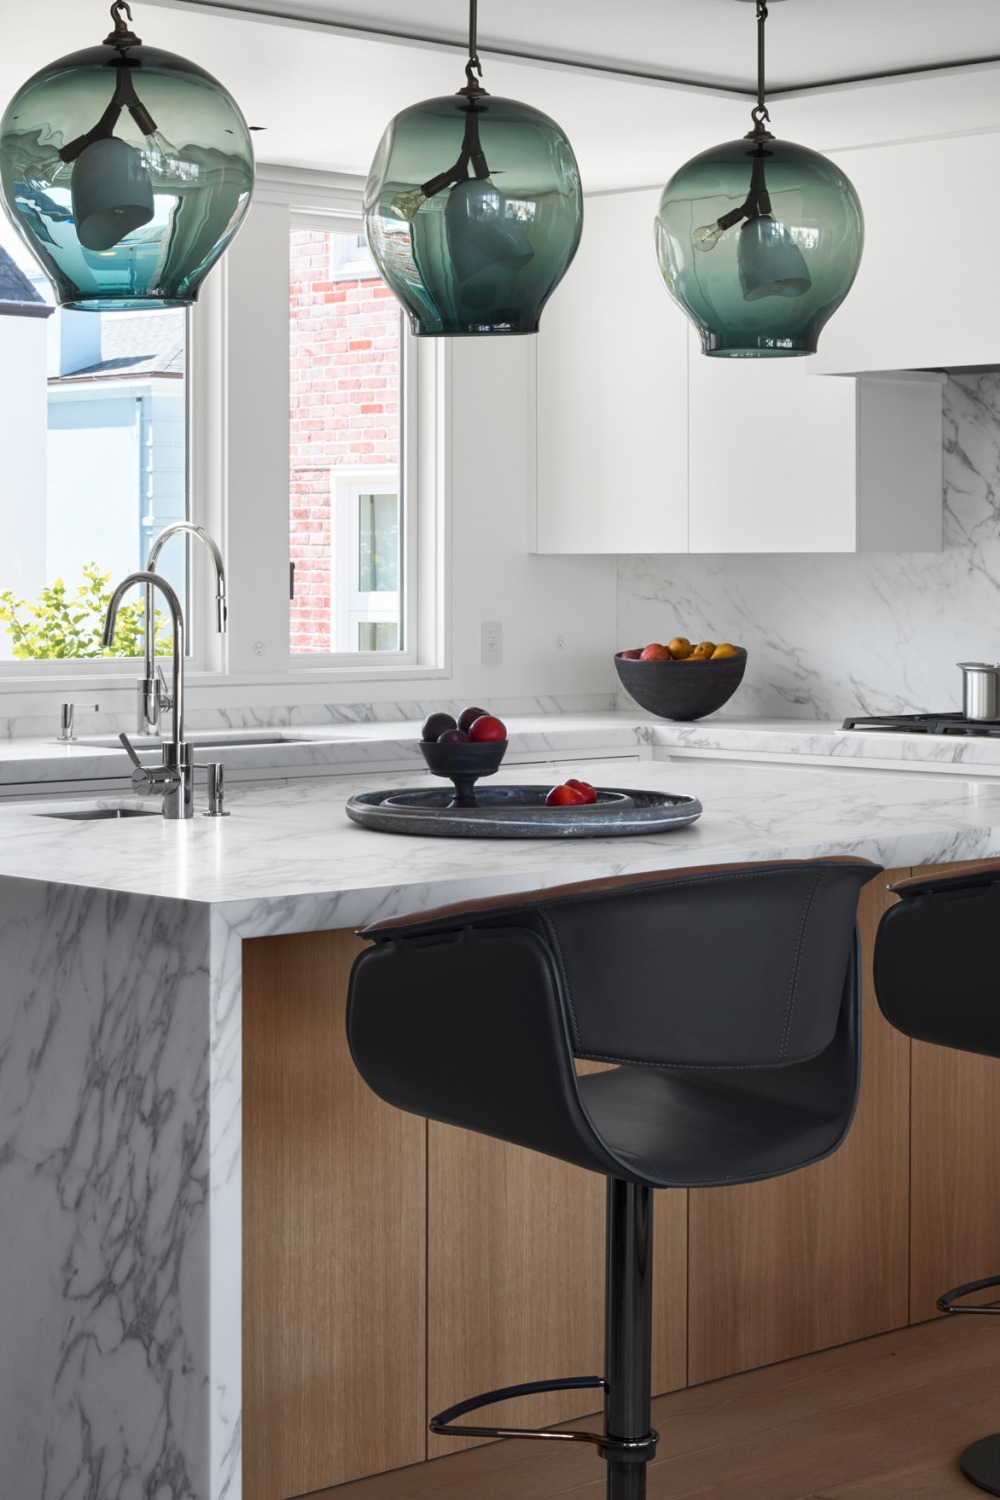 Heat Resistant Dekton Countertops Patterned Surfaces Professionally Installed Non Porous Material